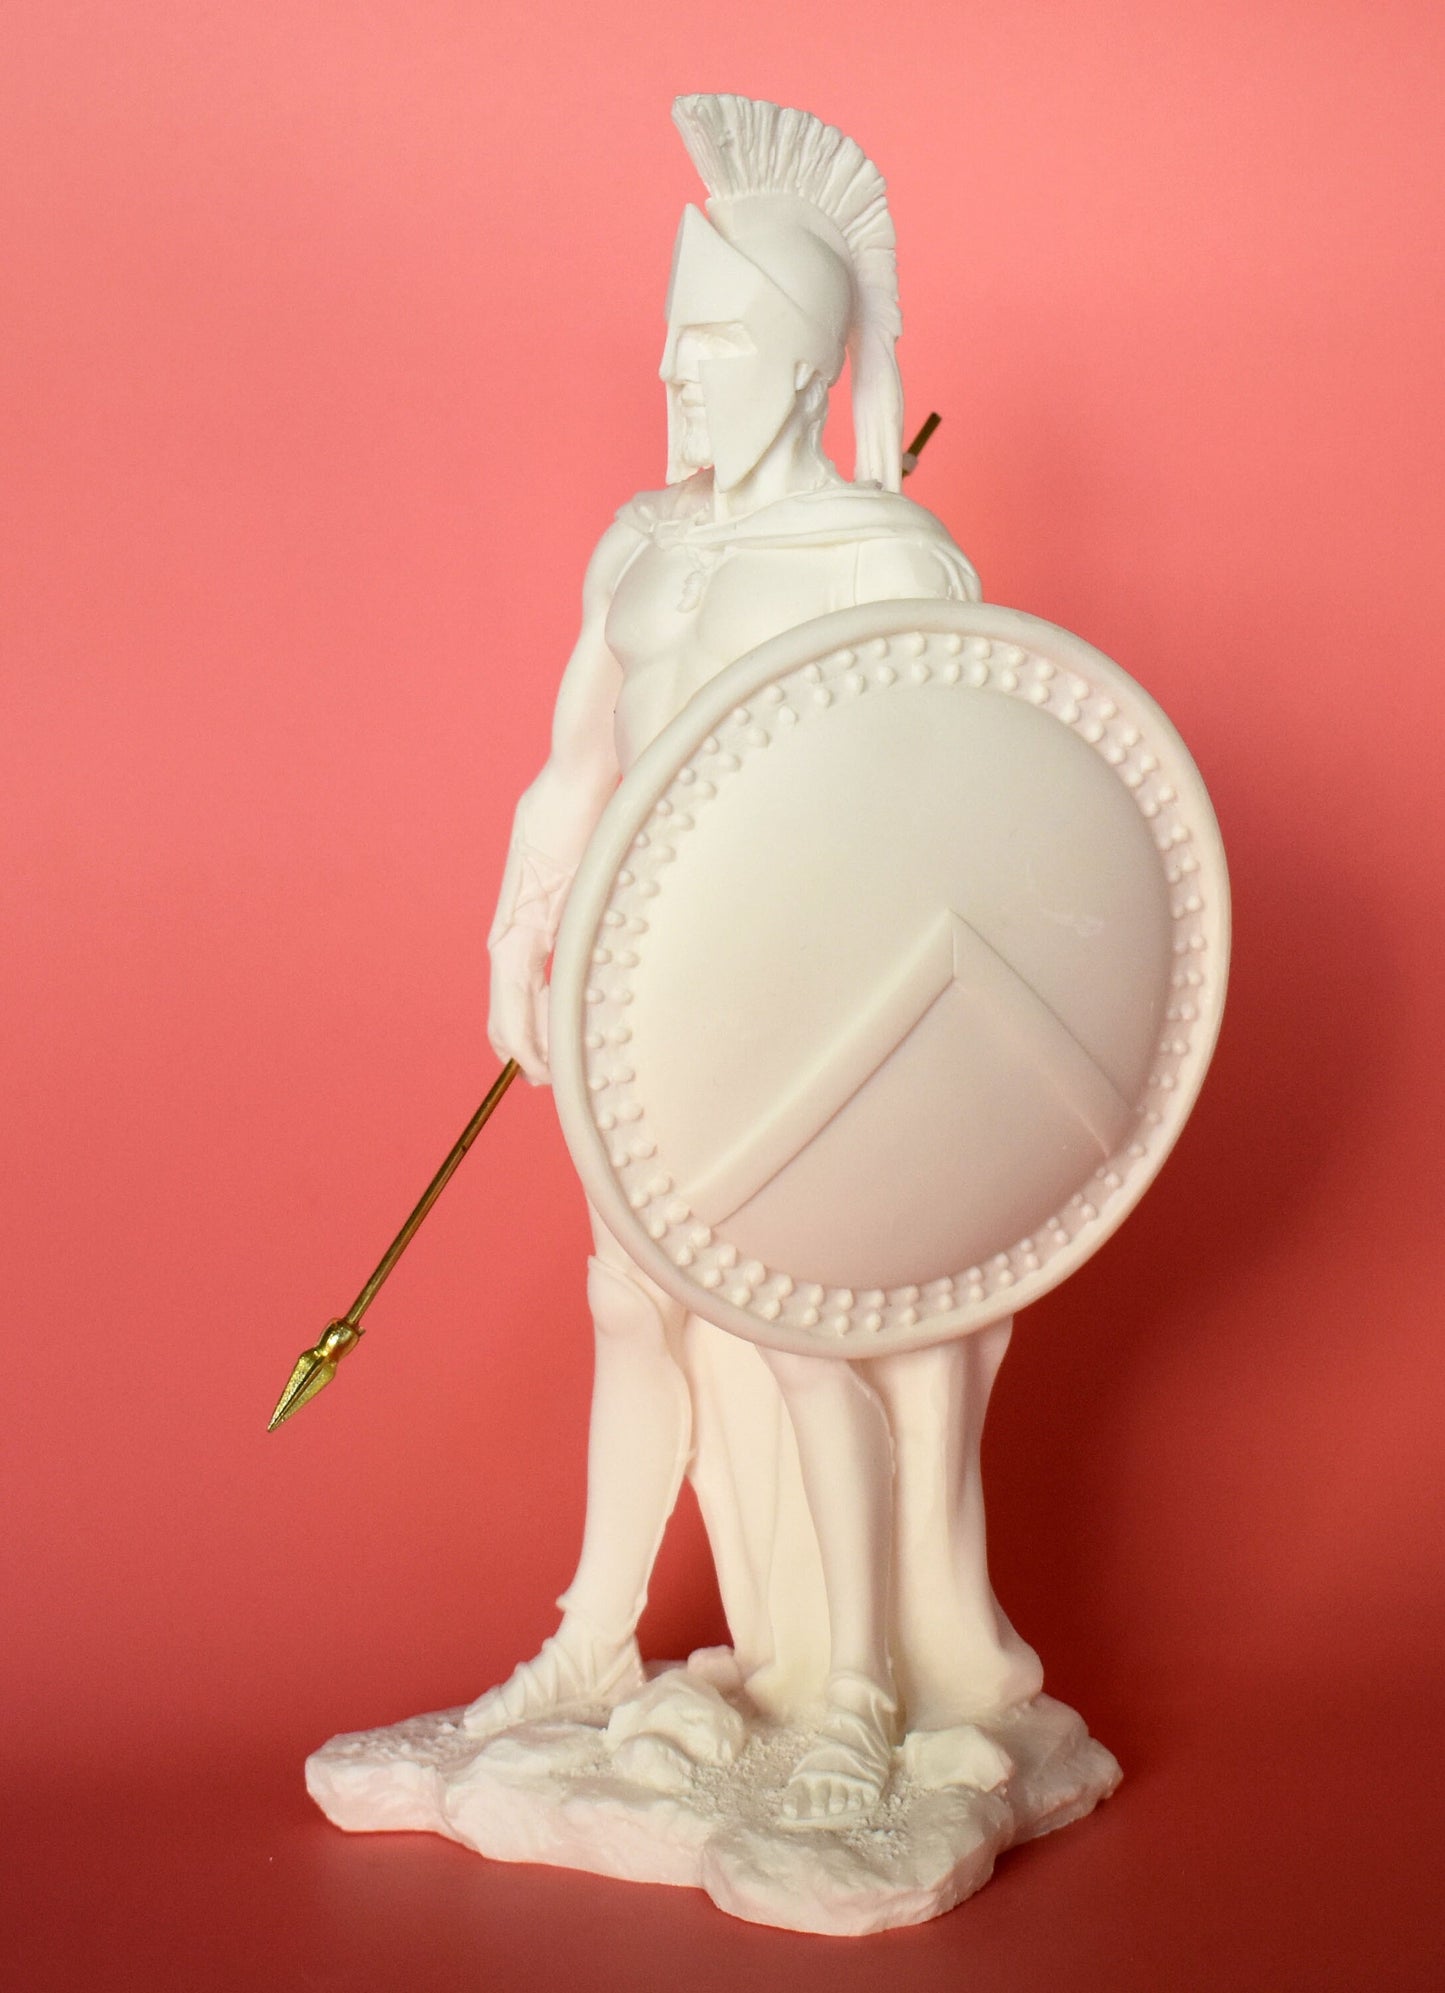 Leonidas - Spartan King - Leader of 300 - Battle of Thermopylae - 480 BC - Molon Labe, Come and Take Them  - Alabaster Sculpture Statue